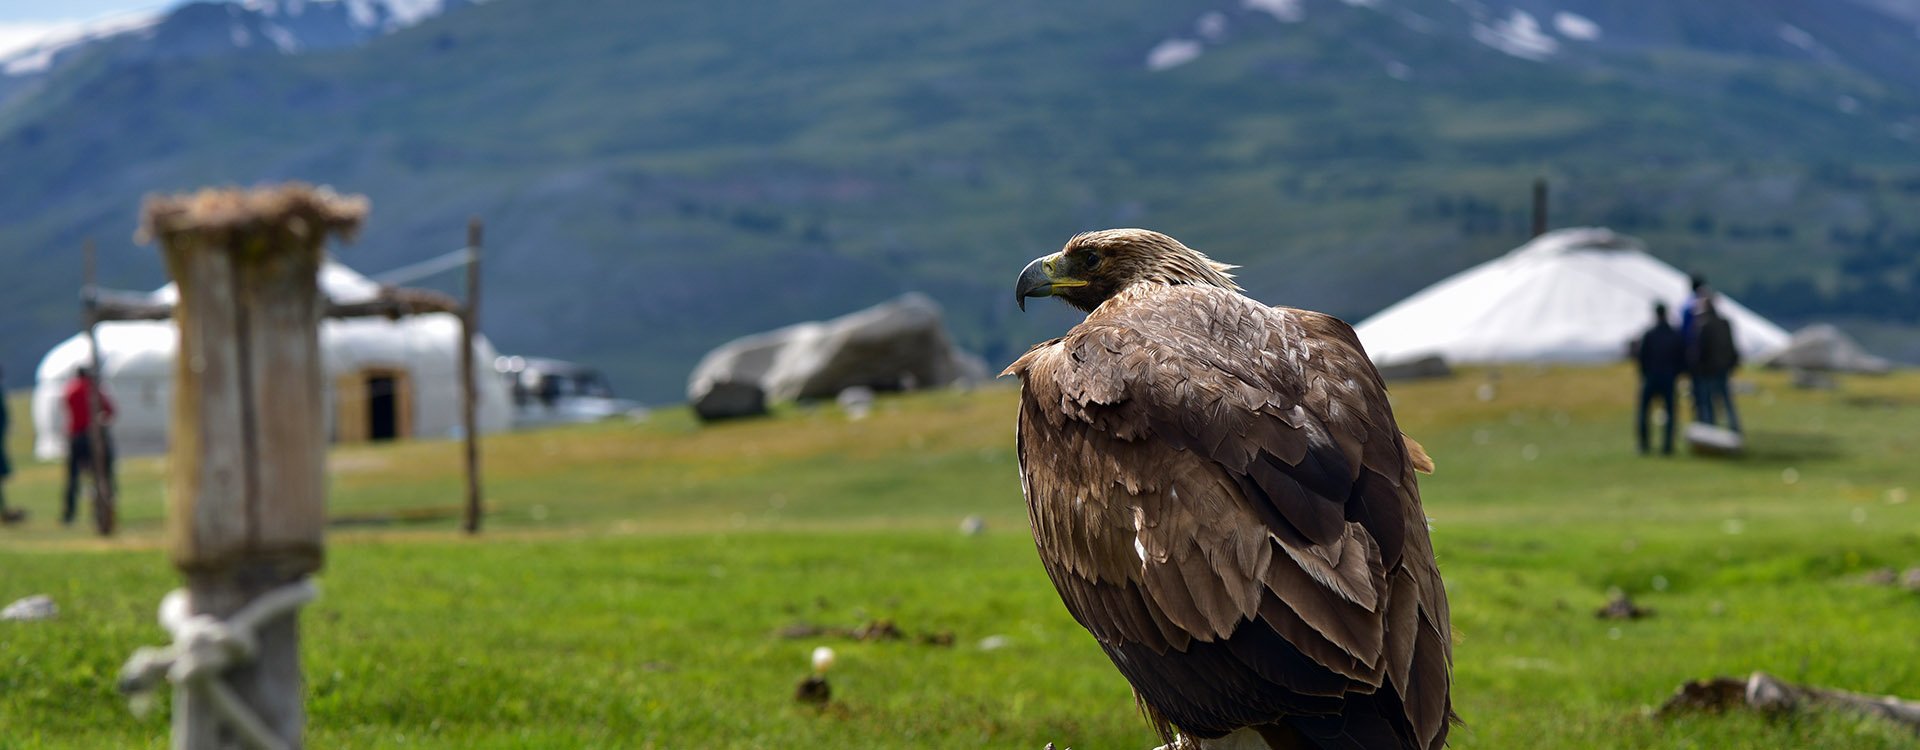 Wild eagle portrait in Mongolia with green landscape and partially snowy mountains